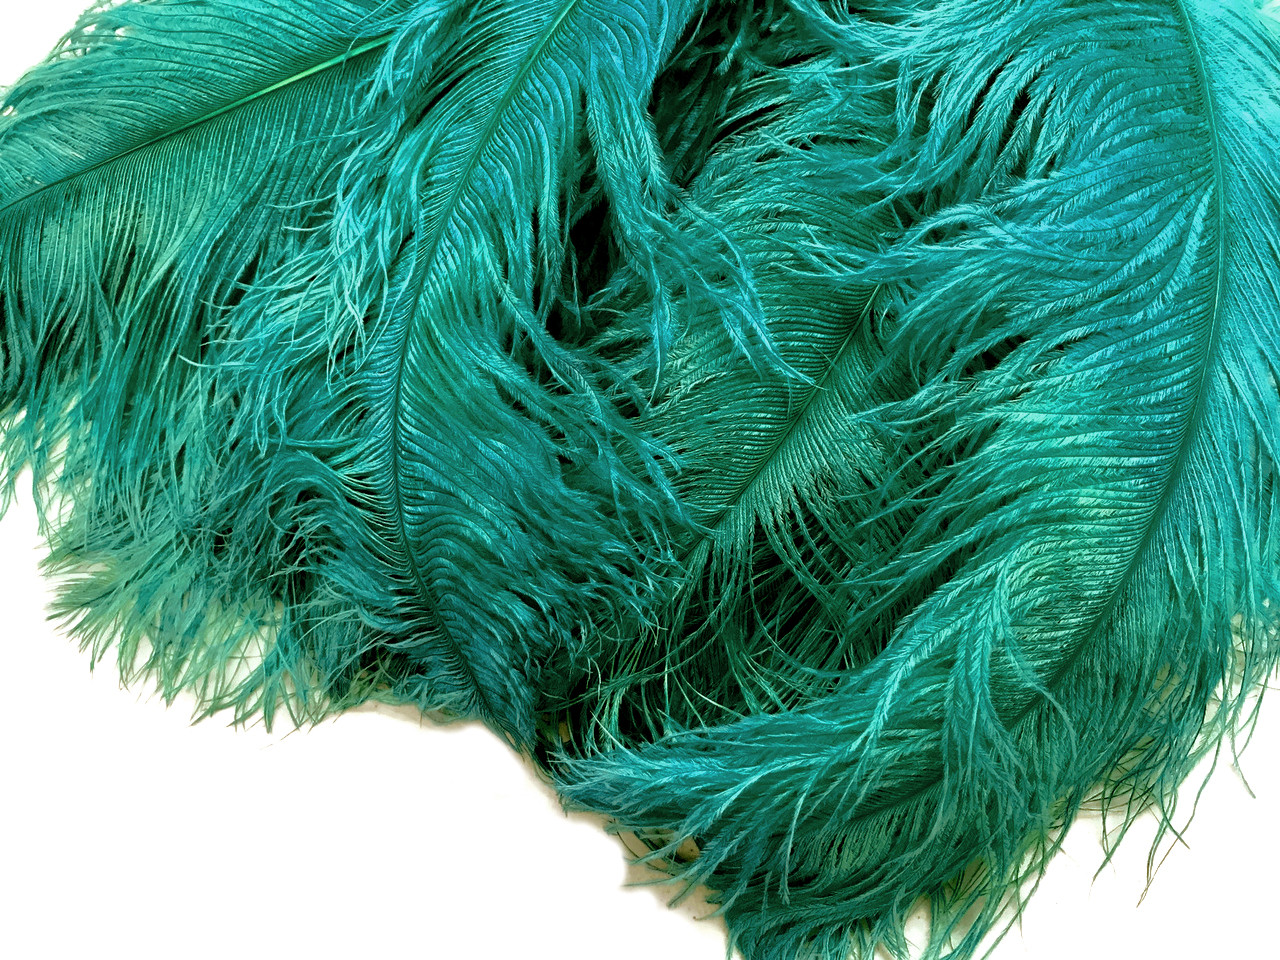 1/2 Lb. - 18-24 Teal Green Large Ostrich Wing Plume Wholesale Feathers  (Bulk)